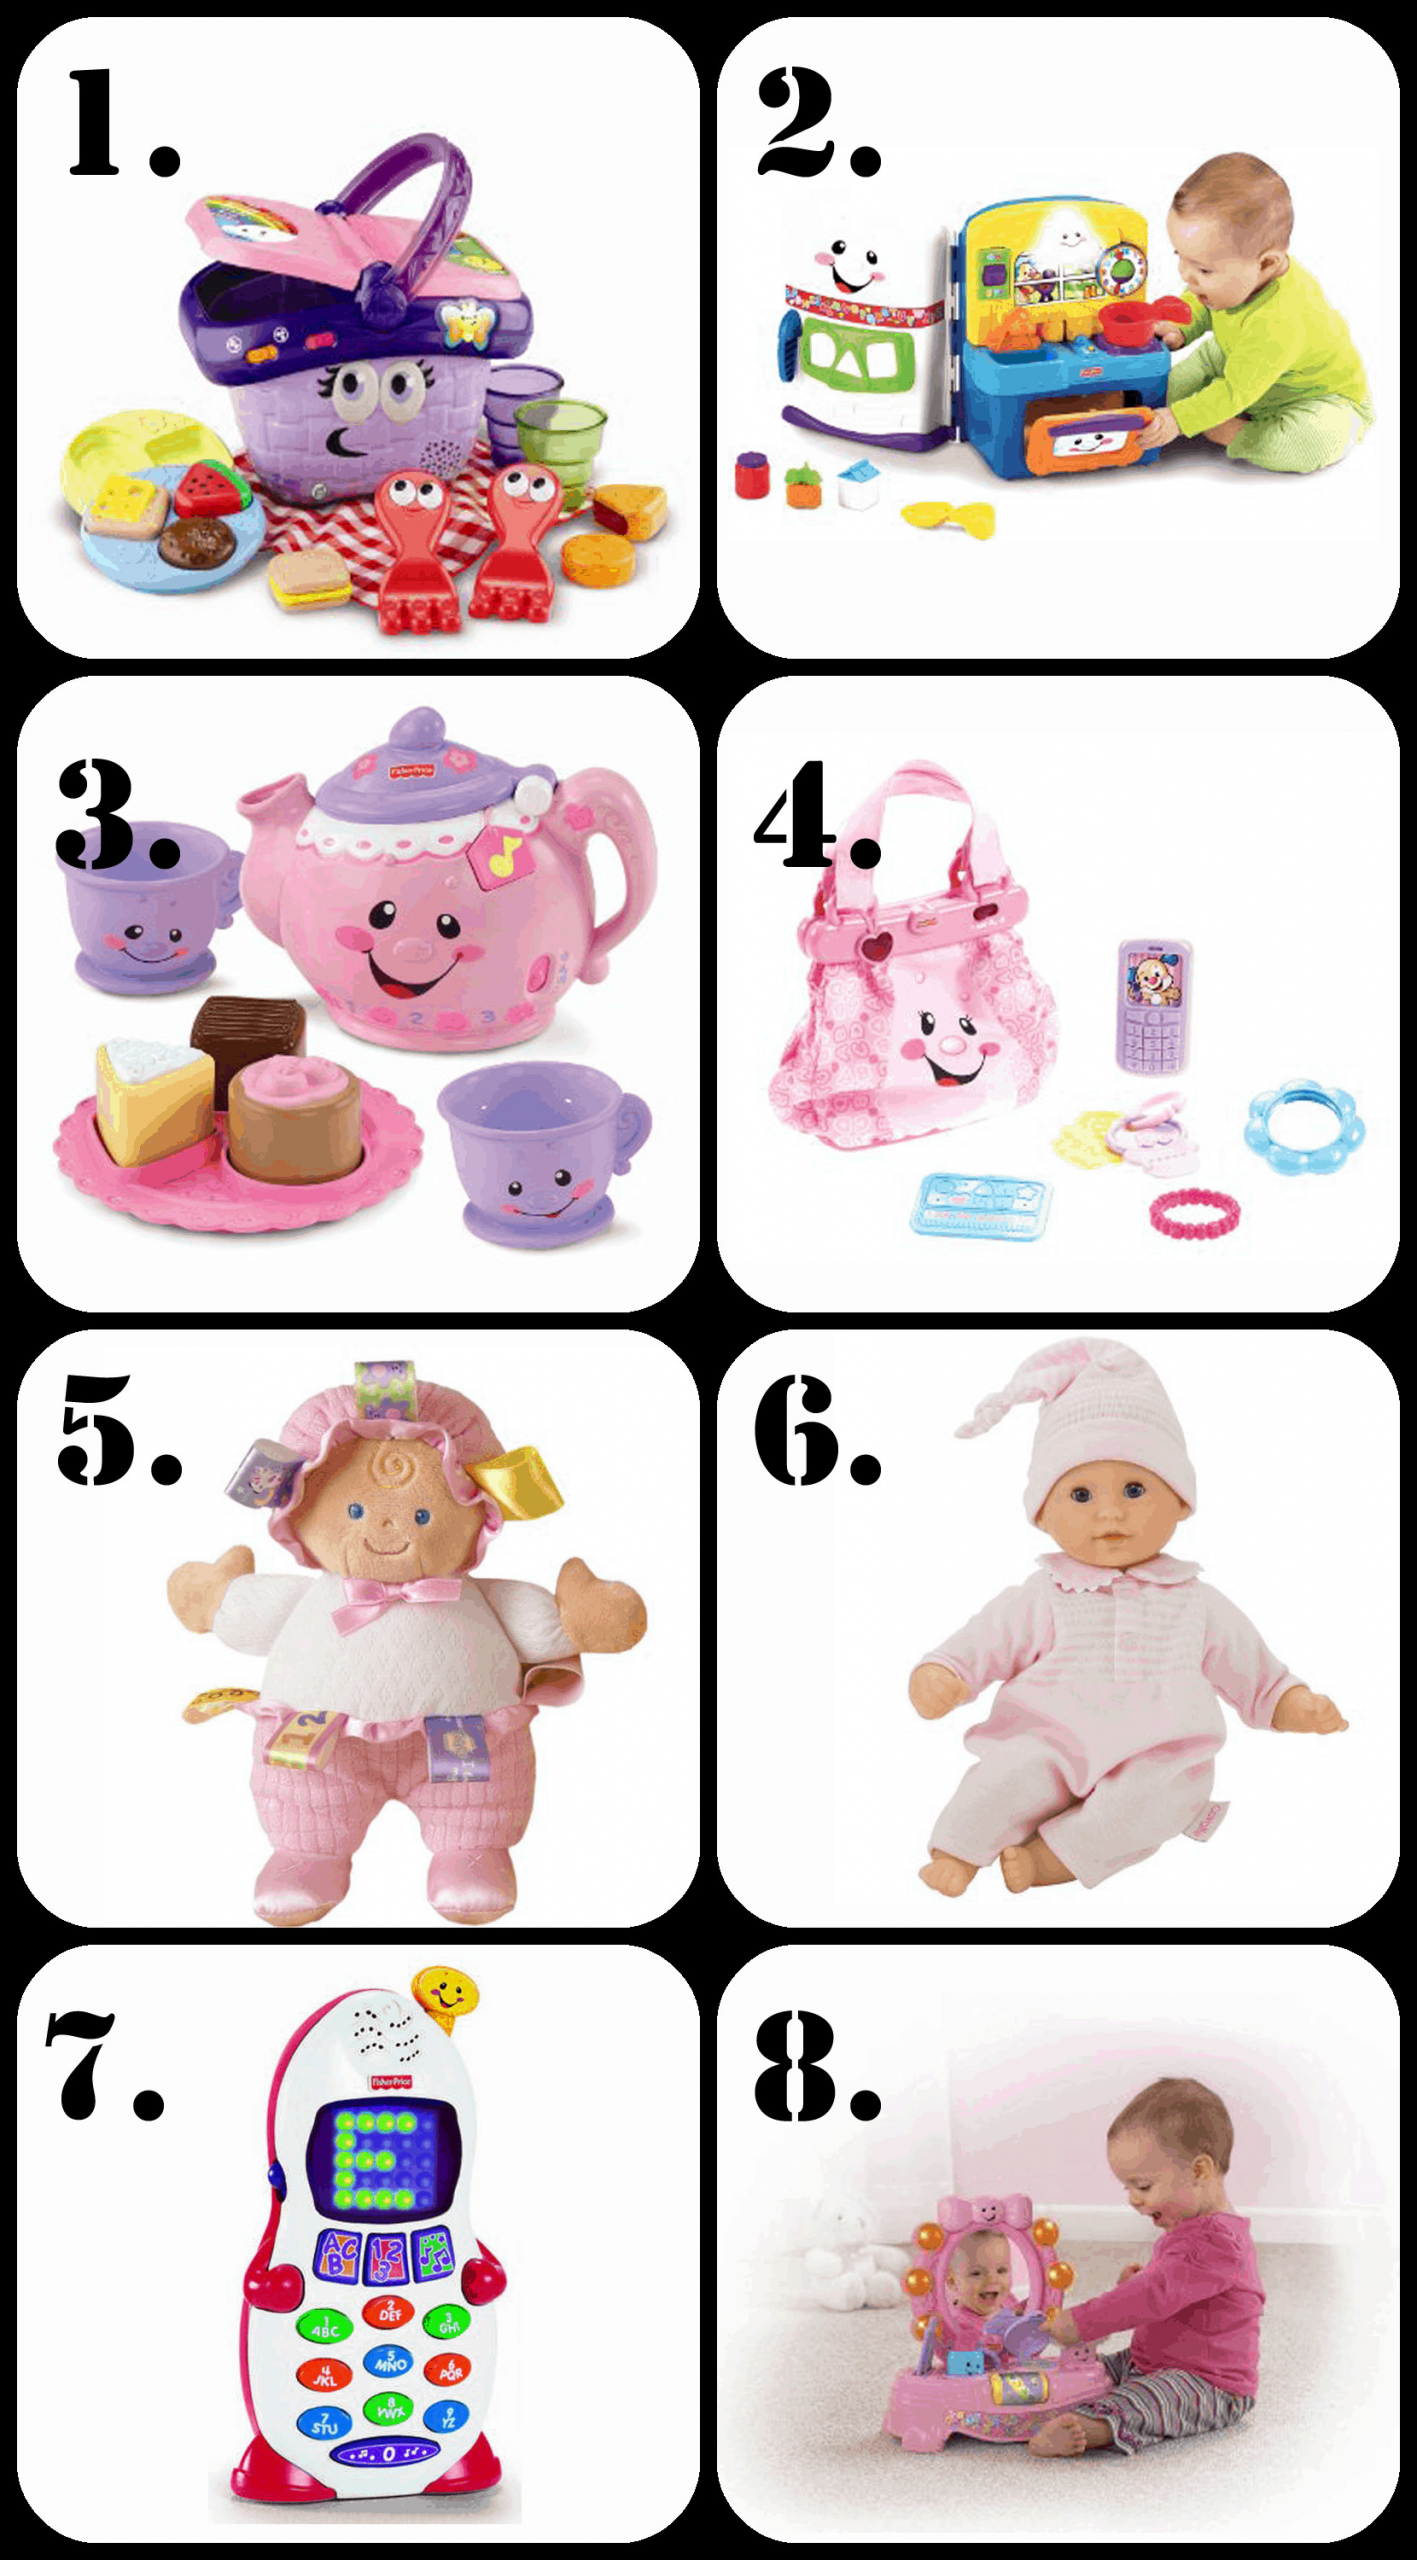 One Year Old Christmas Gift
 The Ultimate List of Gift Ideas for a 1 Year Old Girl